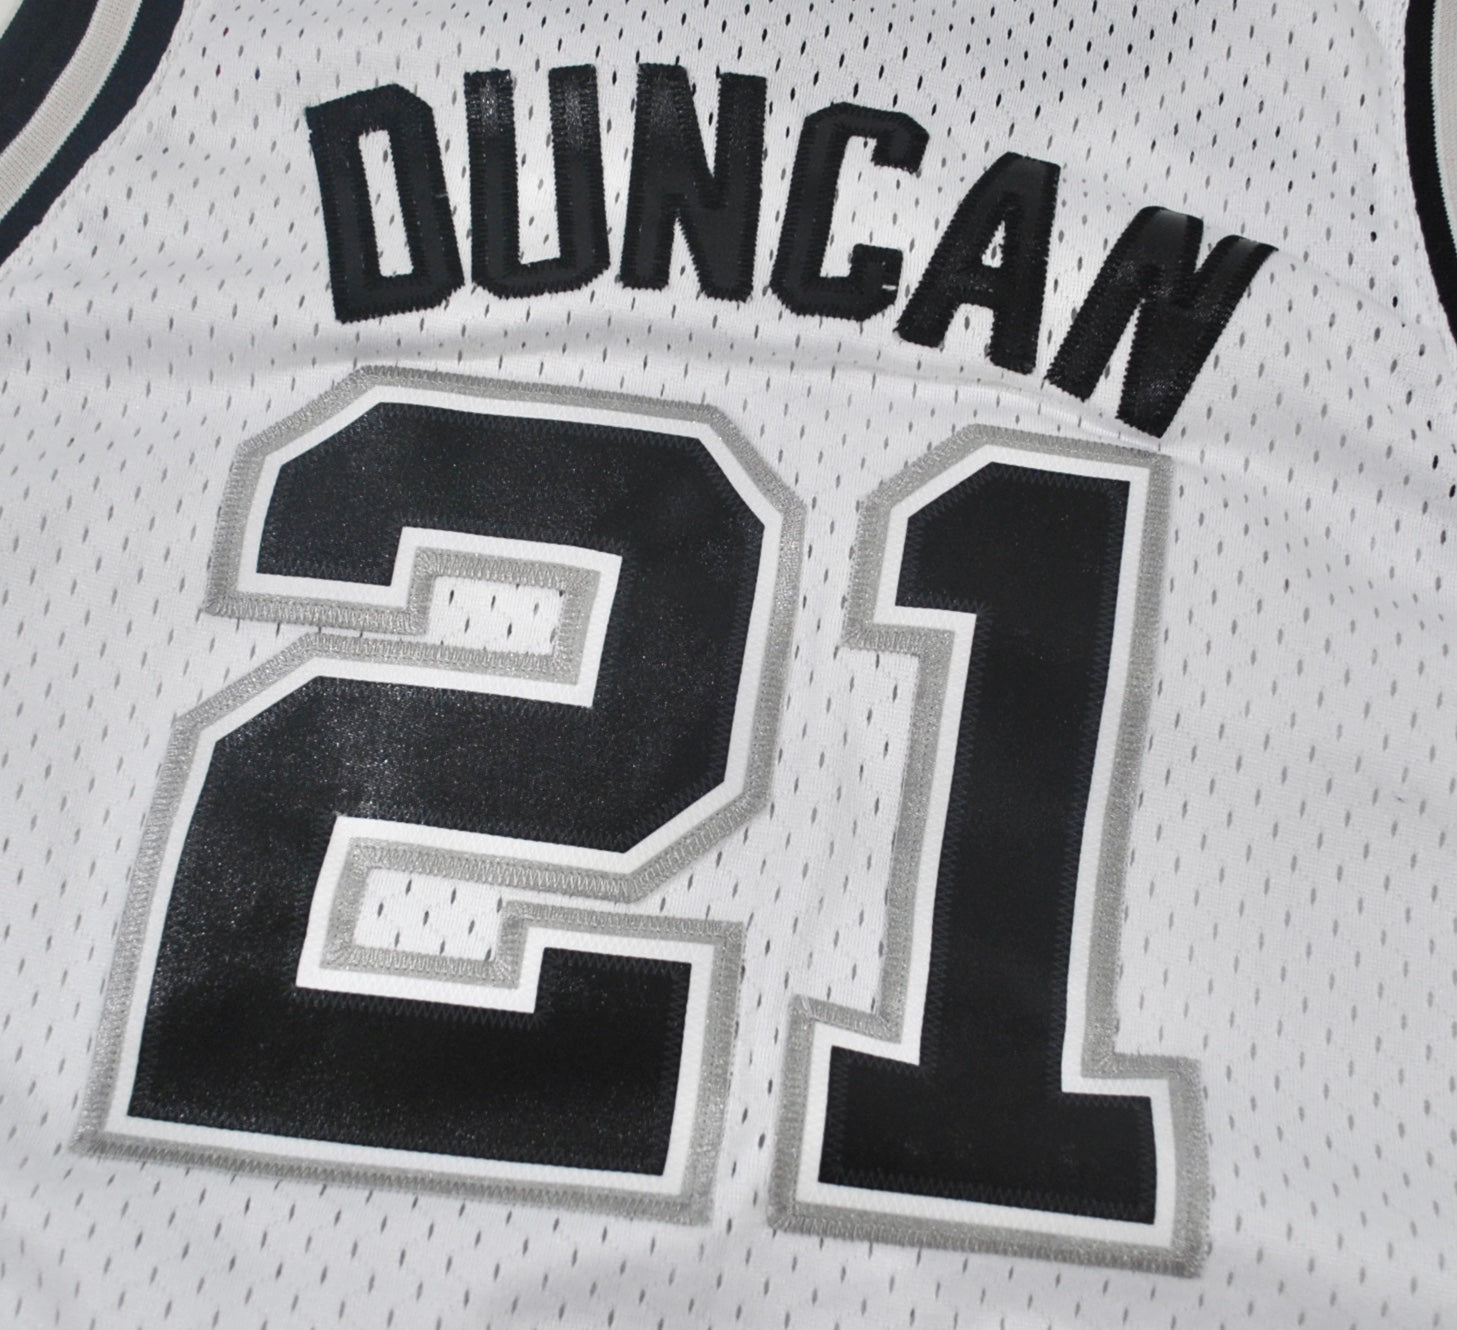 San Antonio Spurs Tim Duncan Jersey Size Youth Large – Yesterday's Attic